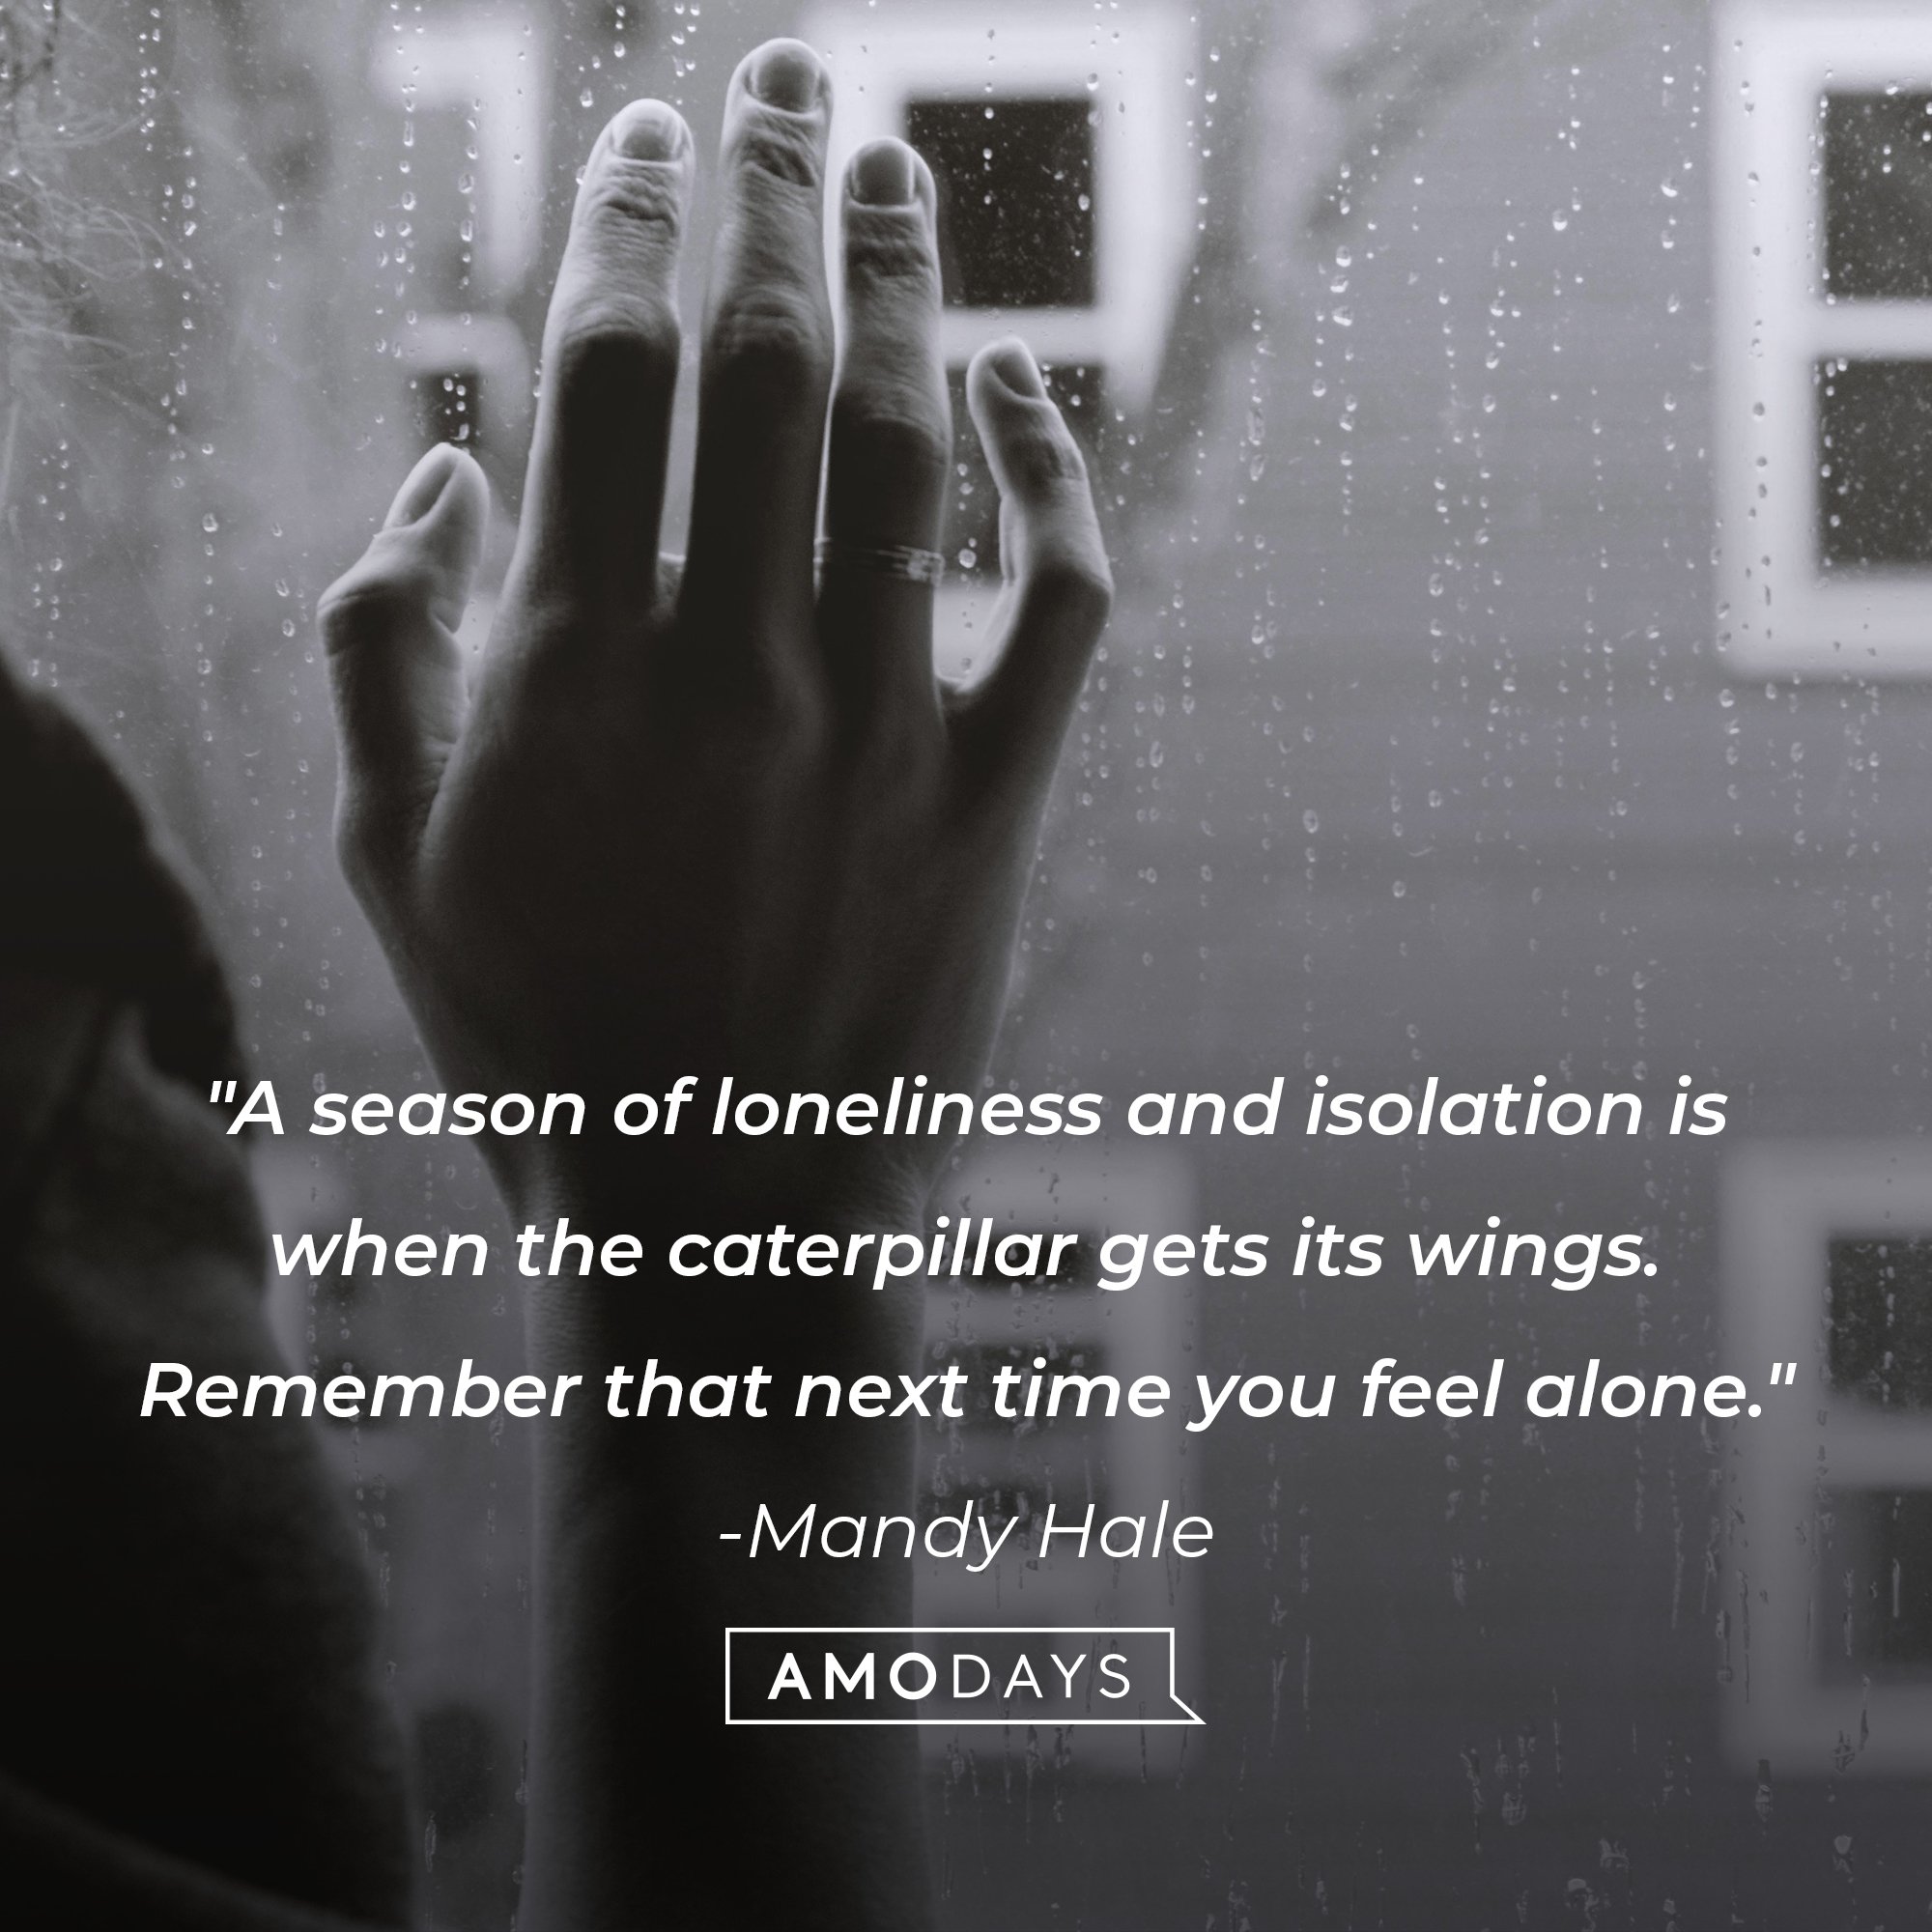 Mandy Hale’s quote: "A season of loneliness and isolation is when the caterpillar gets its wings. Remember that next time you feel alone." |  Image: AmoDays 